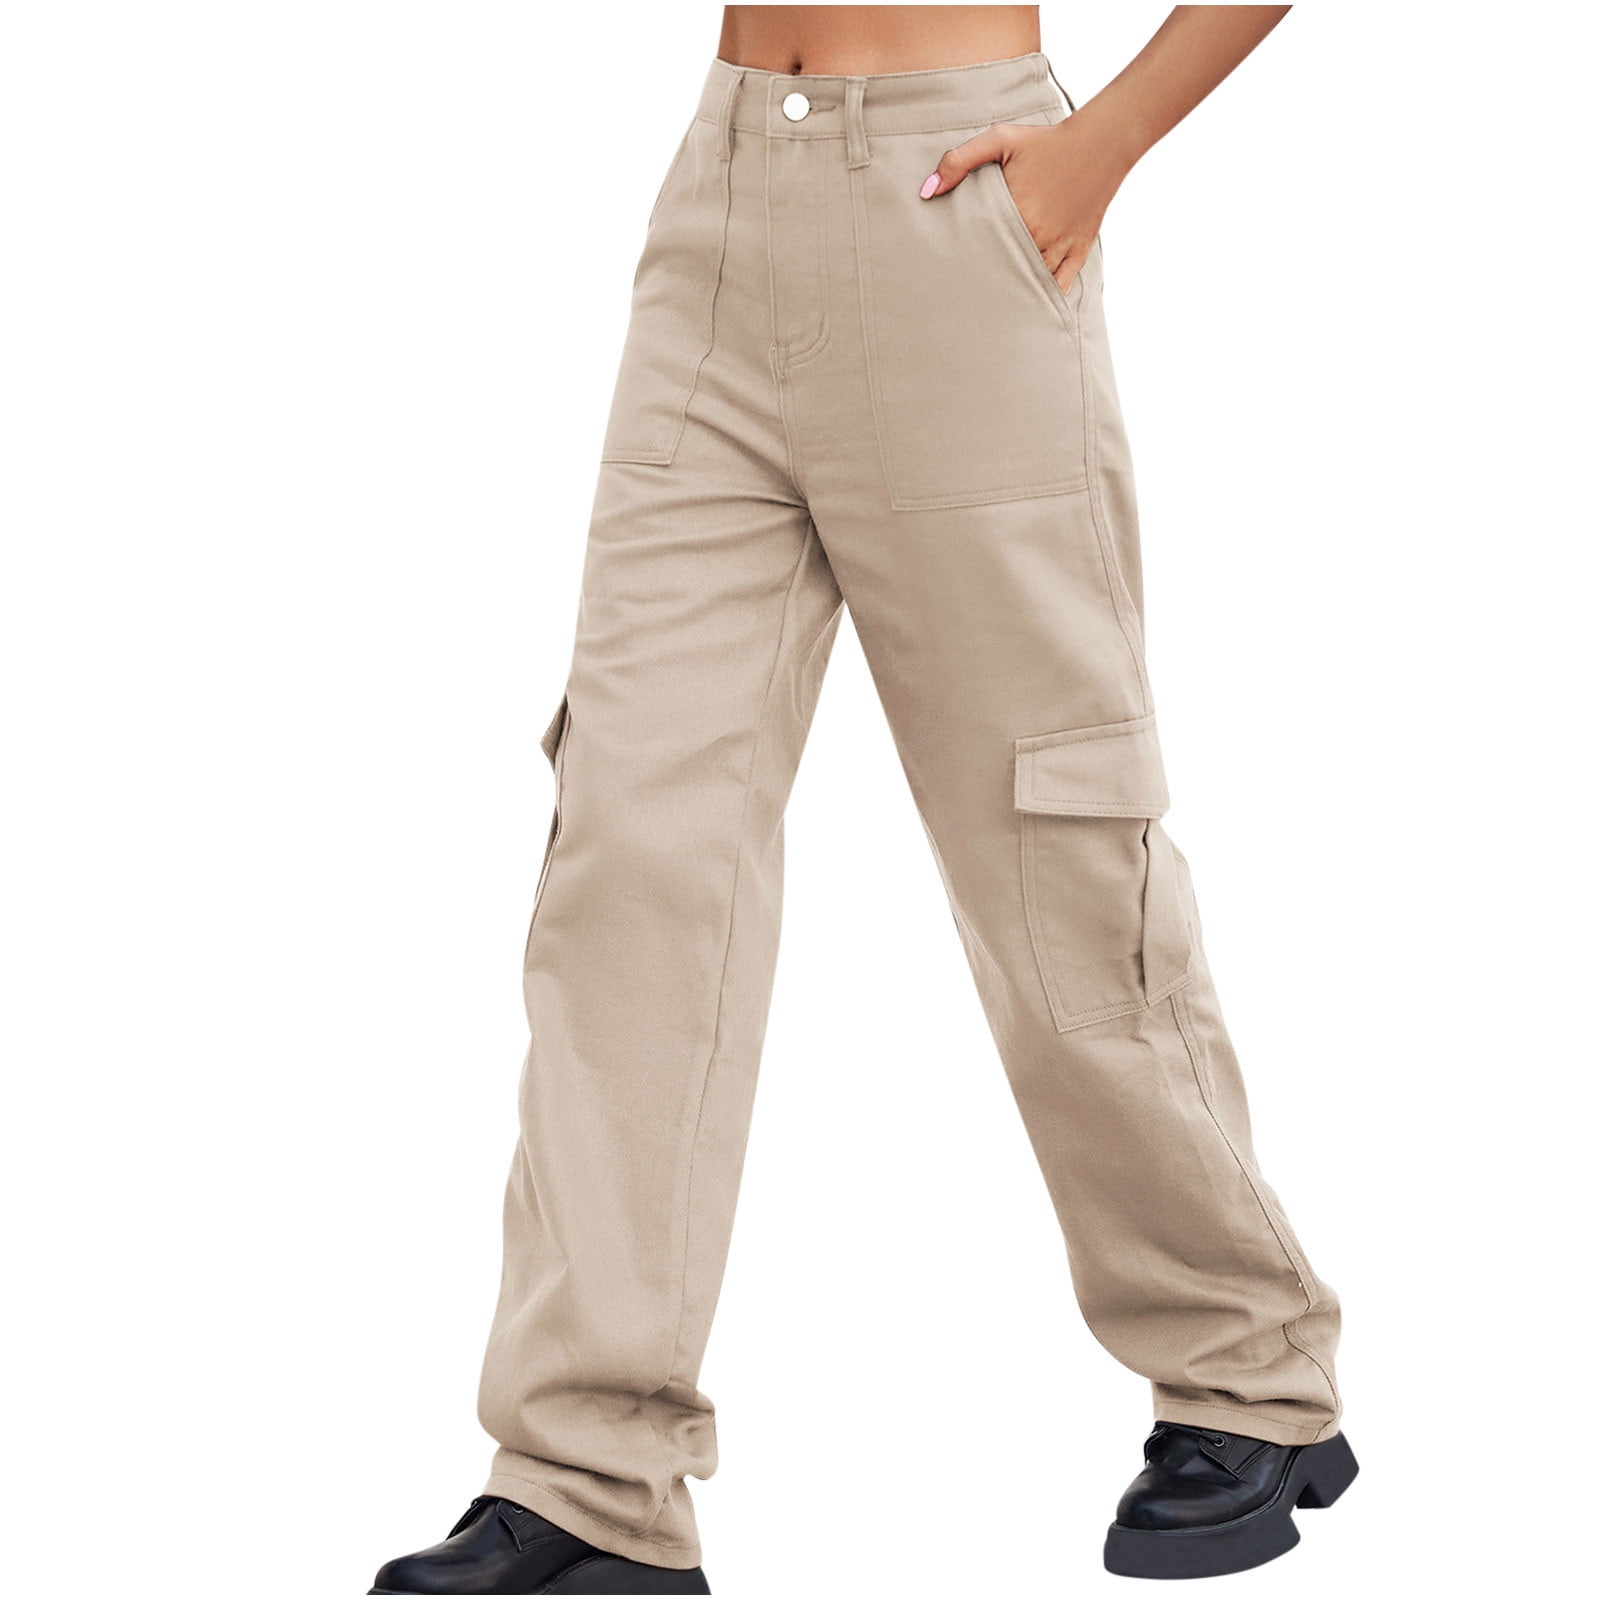 RQYYD Women's Cargo Pants High Waist Stretch Jeans Wide Leg Baggy Pockets  Solid Casual Lightweight Straight Y2K Pants(Khaki,M)